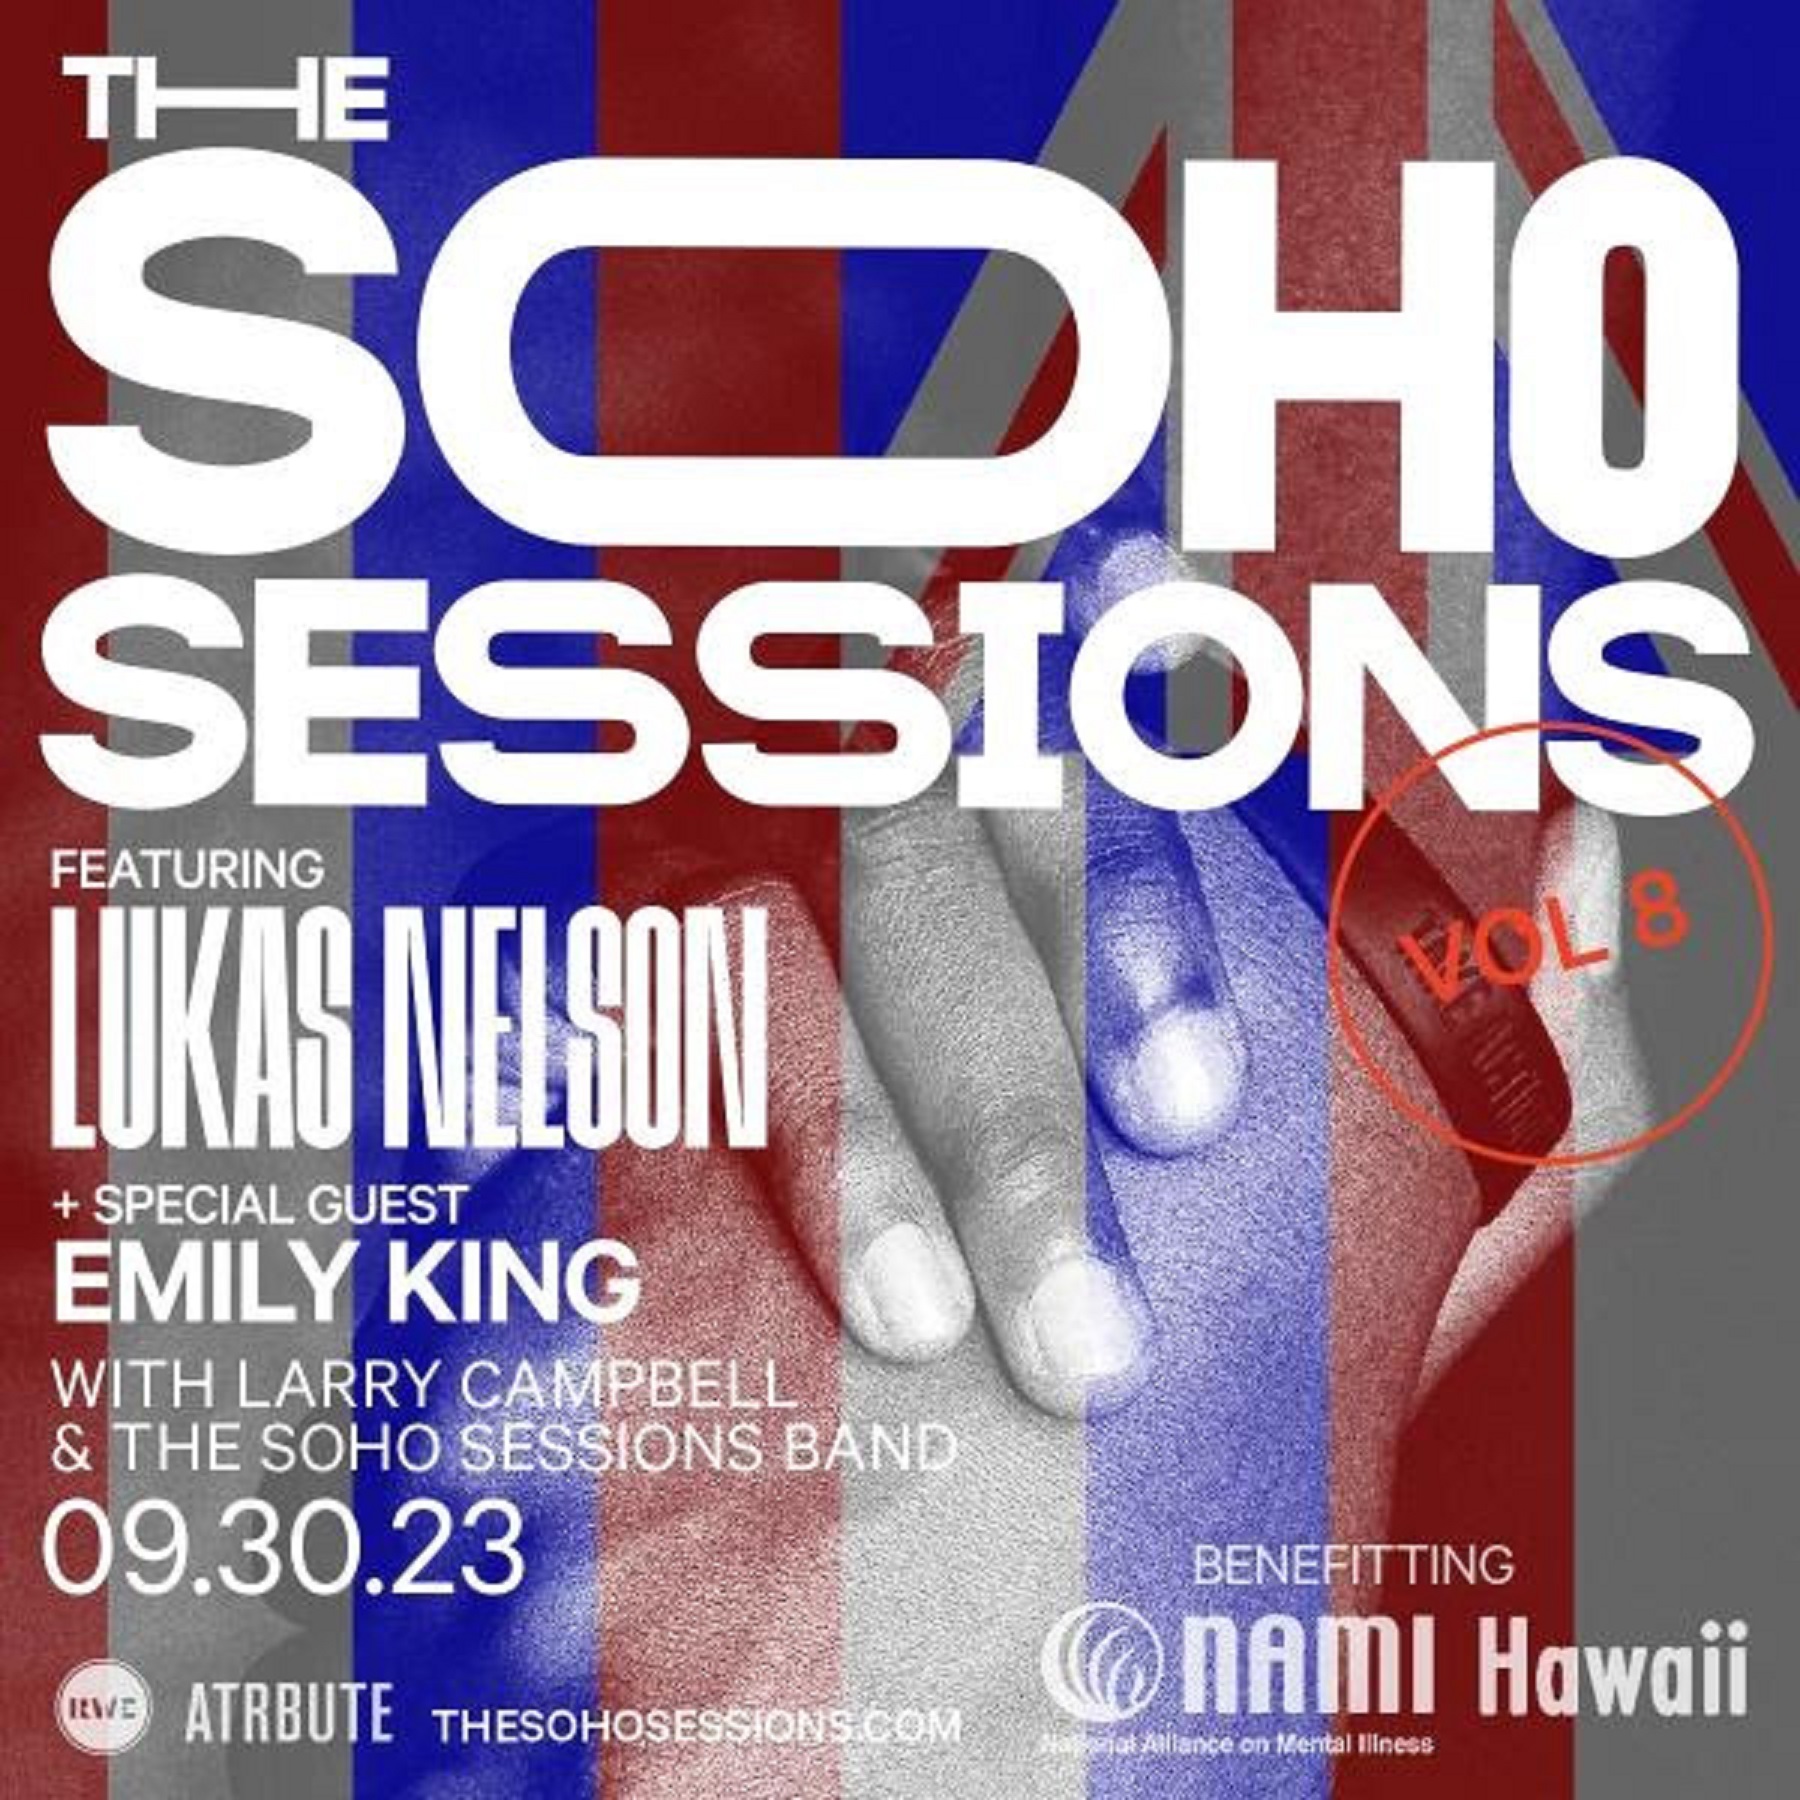 Lukas Nelson & Emily King Come Together for Soho Sessions, Raise Funds for National Alliance on Mental Health Hawaii